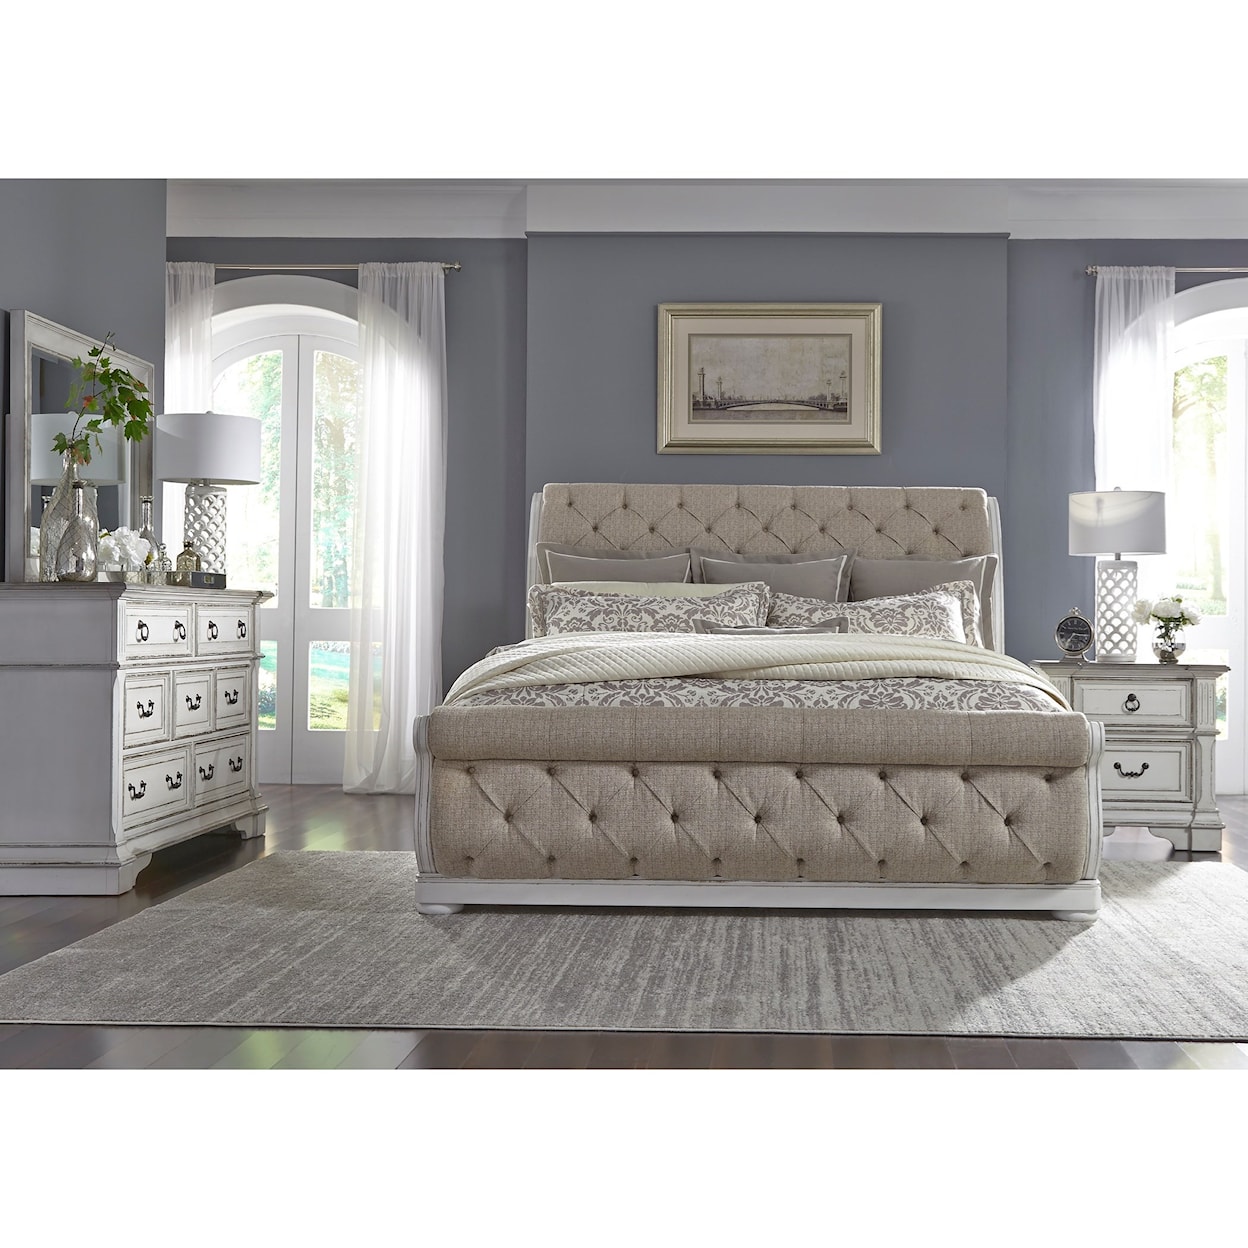 Liberty Furniture Abbey Park 4-Piece California Sleigh King Bedroom Group